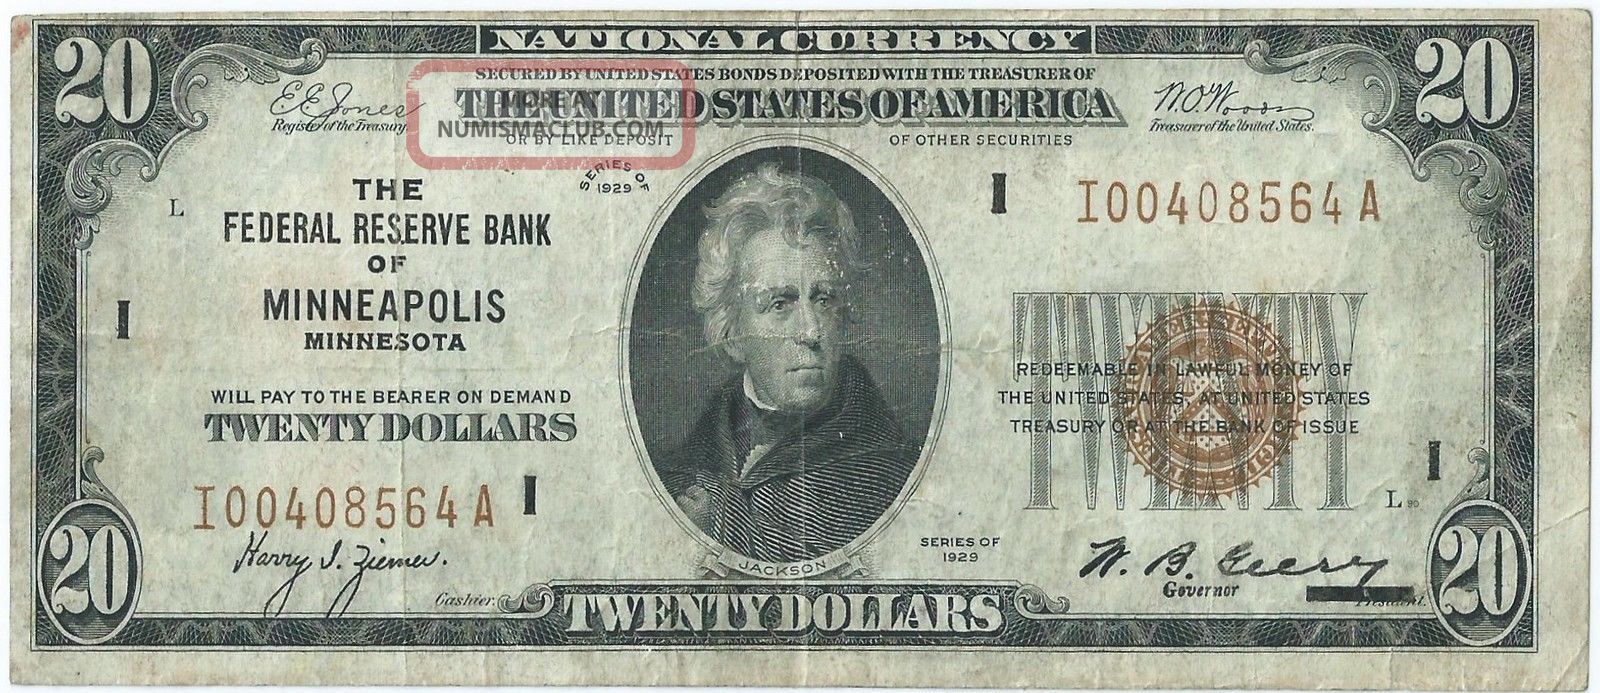 1929 $20 Federal Reserve Bank Note - Fr 1870 - I - Mn - Vf - Jones Woods - Usa Ship Small Size Notes photo